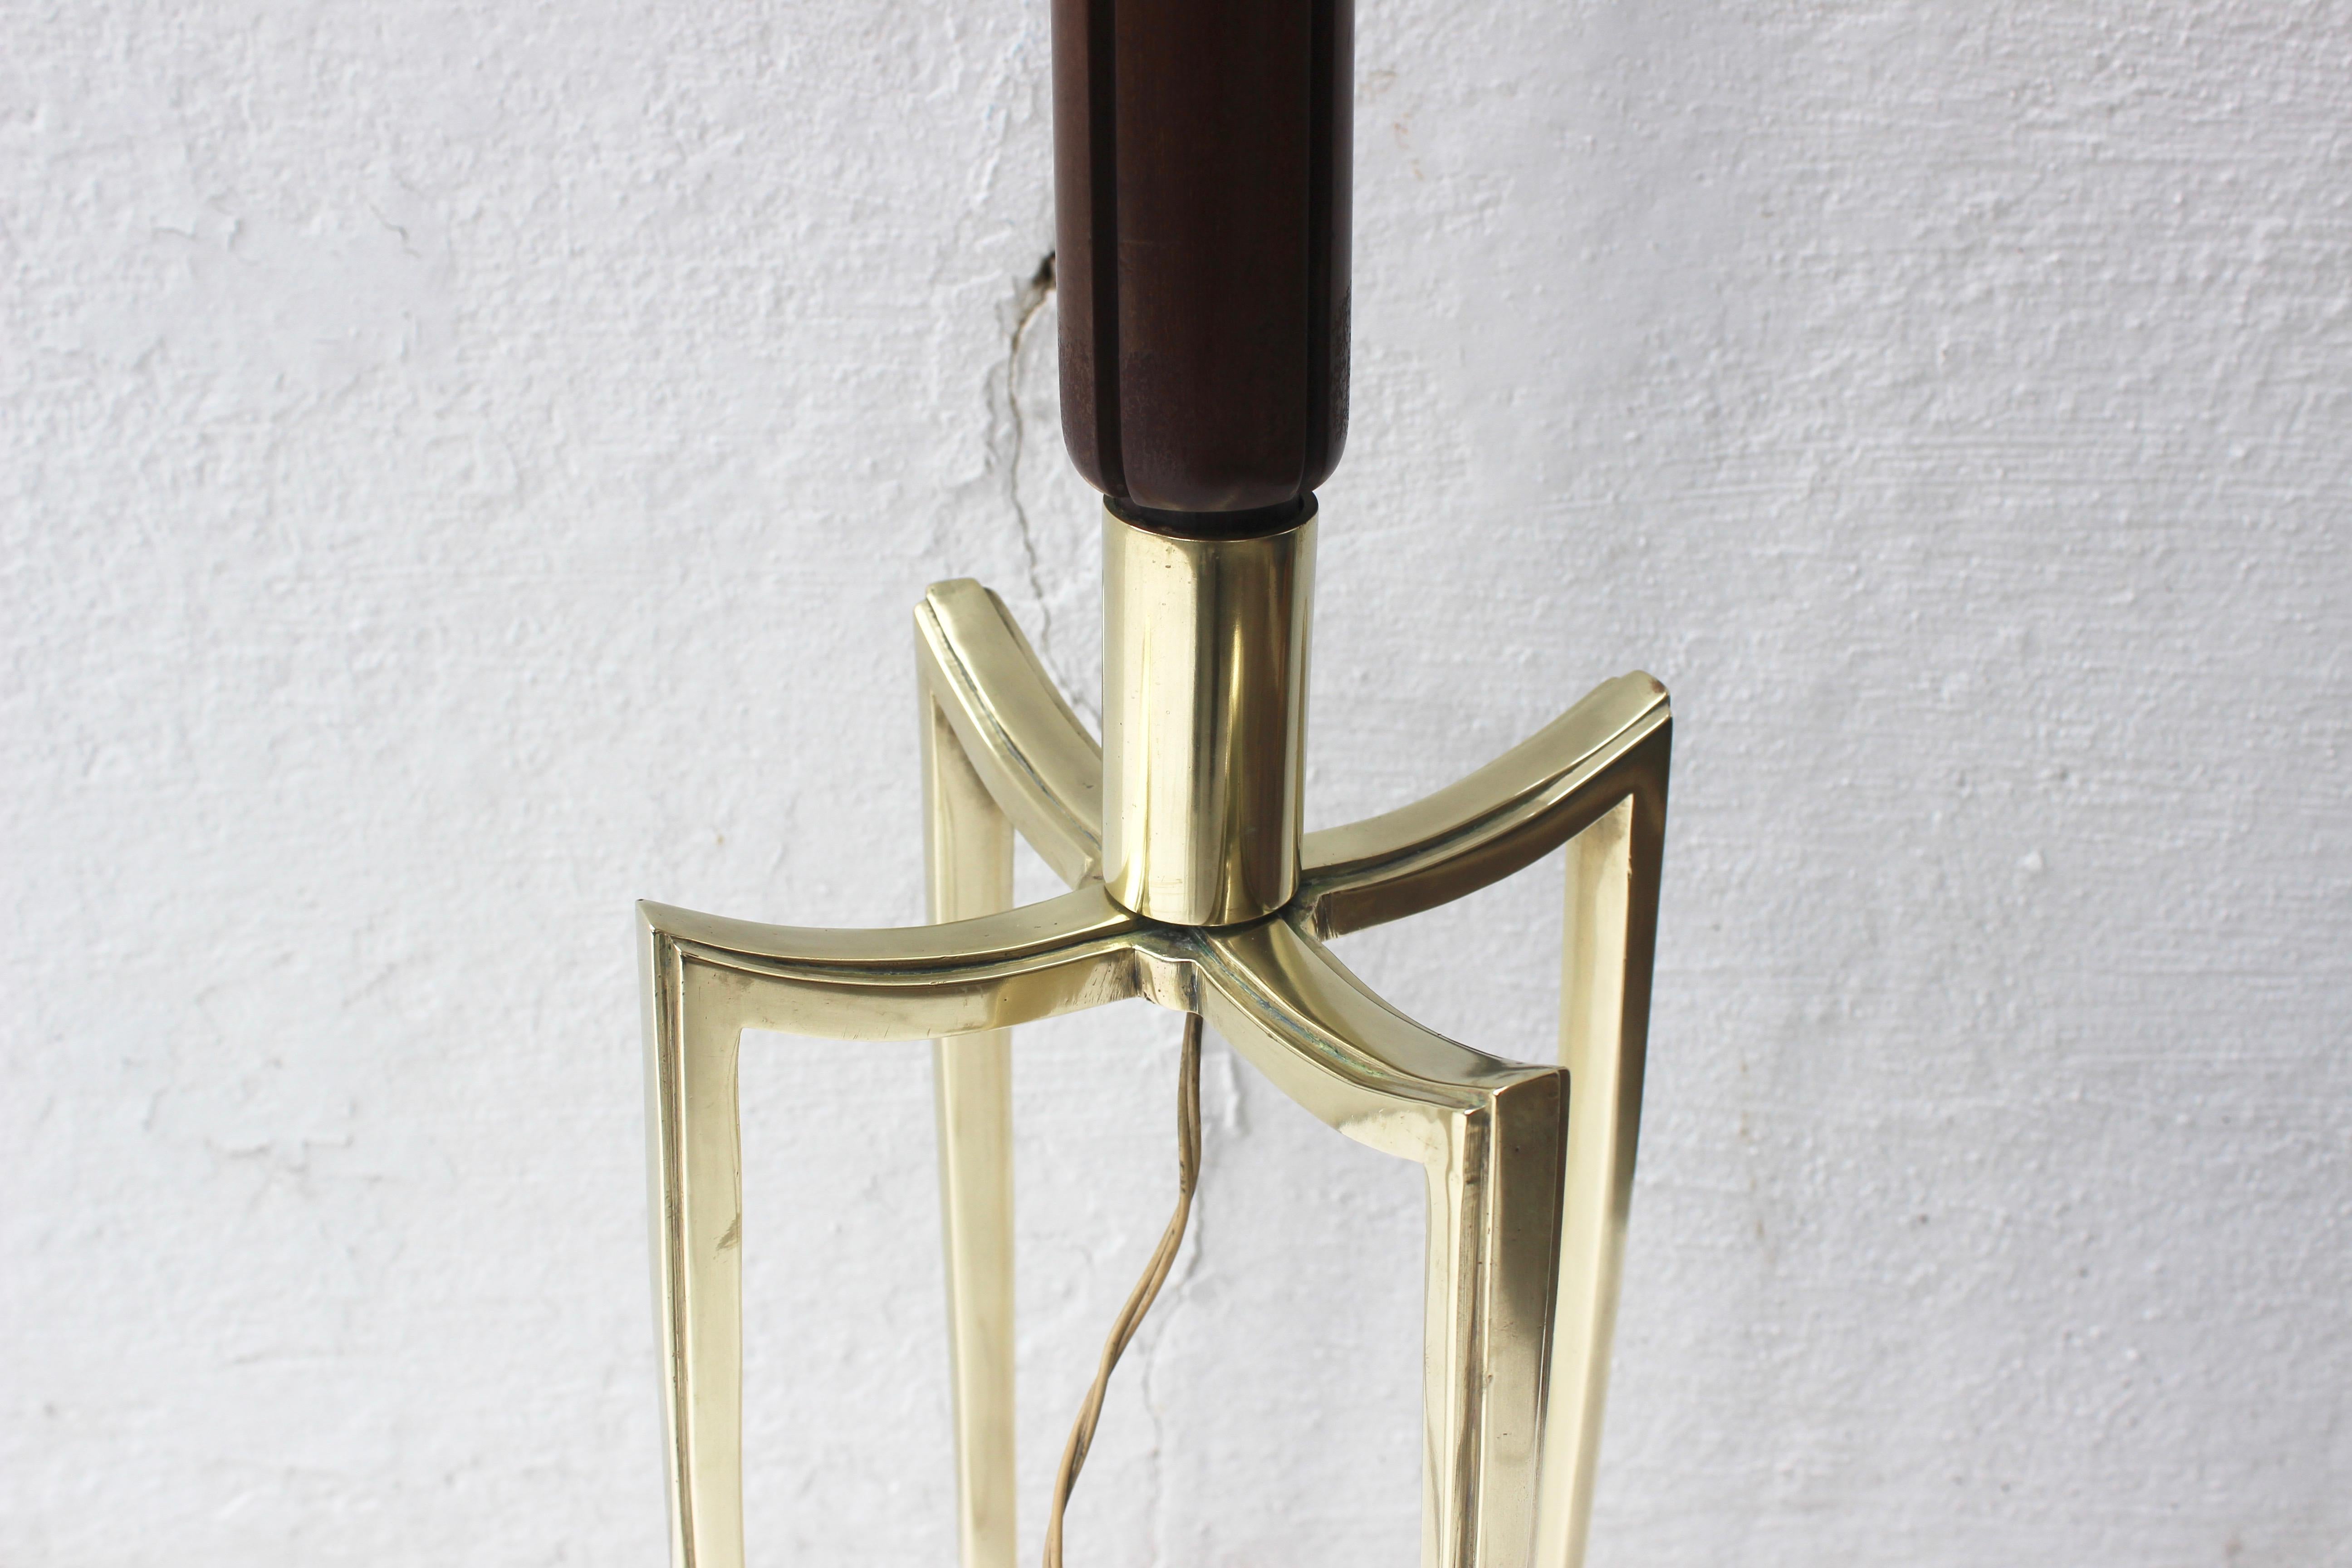 Bronze Grasshopper Floor Lamp In Good Condition For Sale In East Hampton, NY